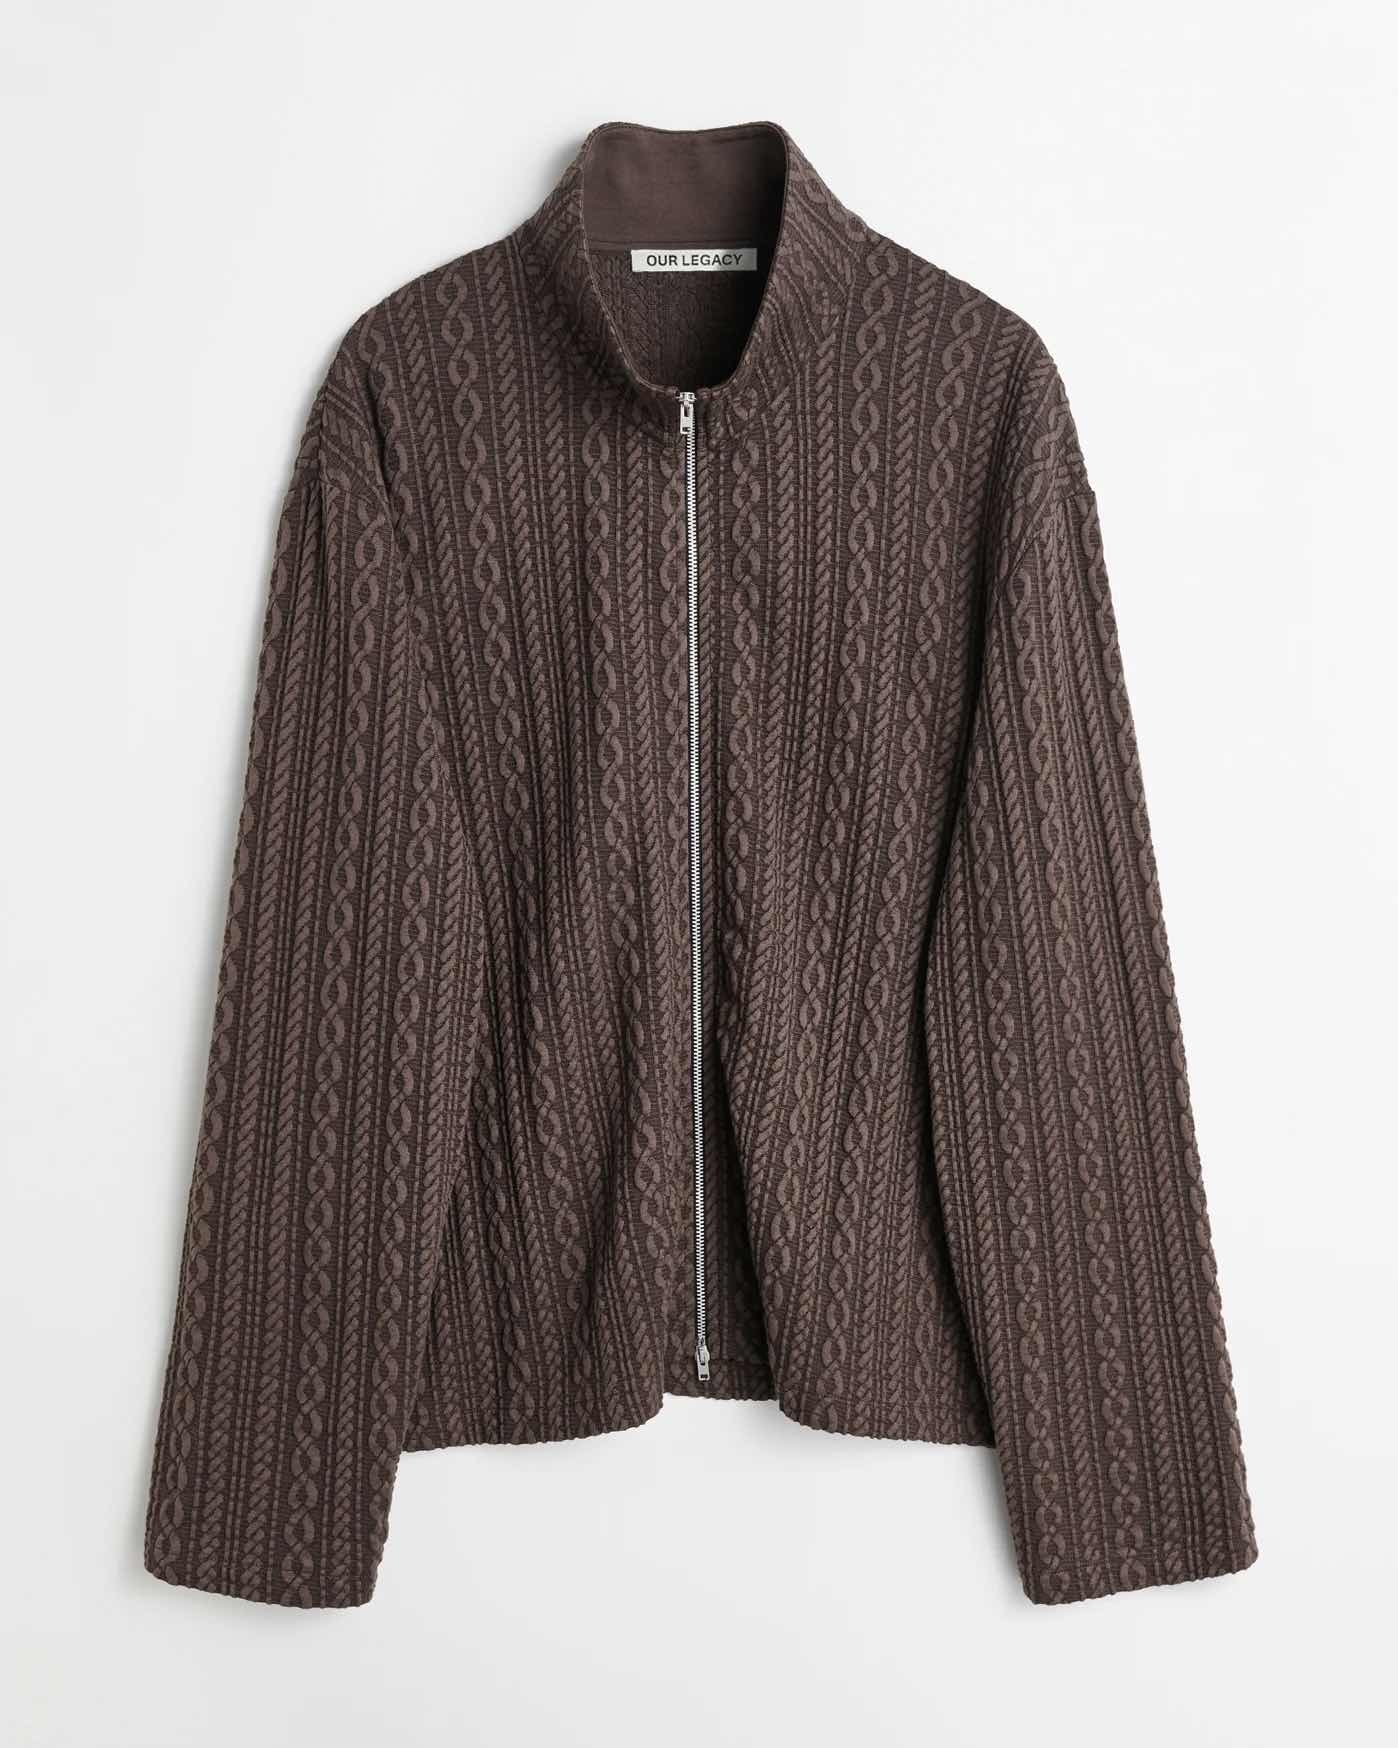 【OUR LEGACY(アワーレガシー)】SHRUNKEN FULLZIP POLO/ Indulgent Choco Cable Jaquard